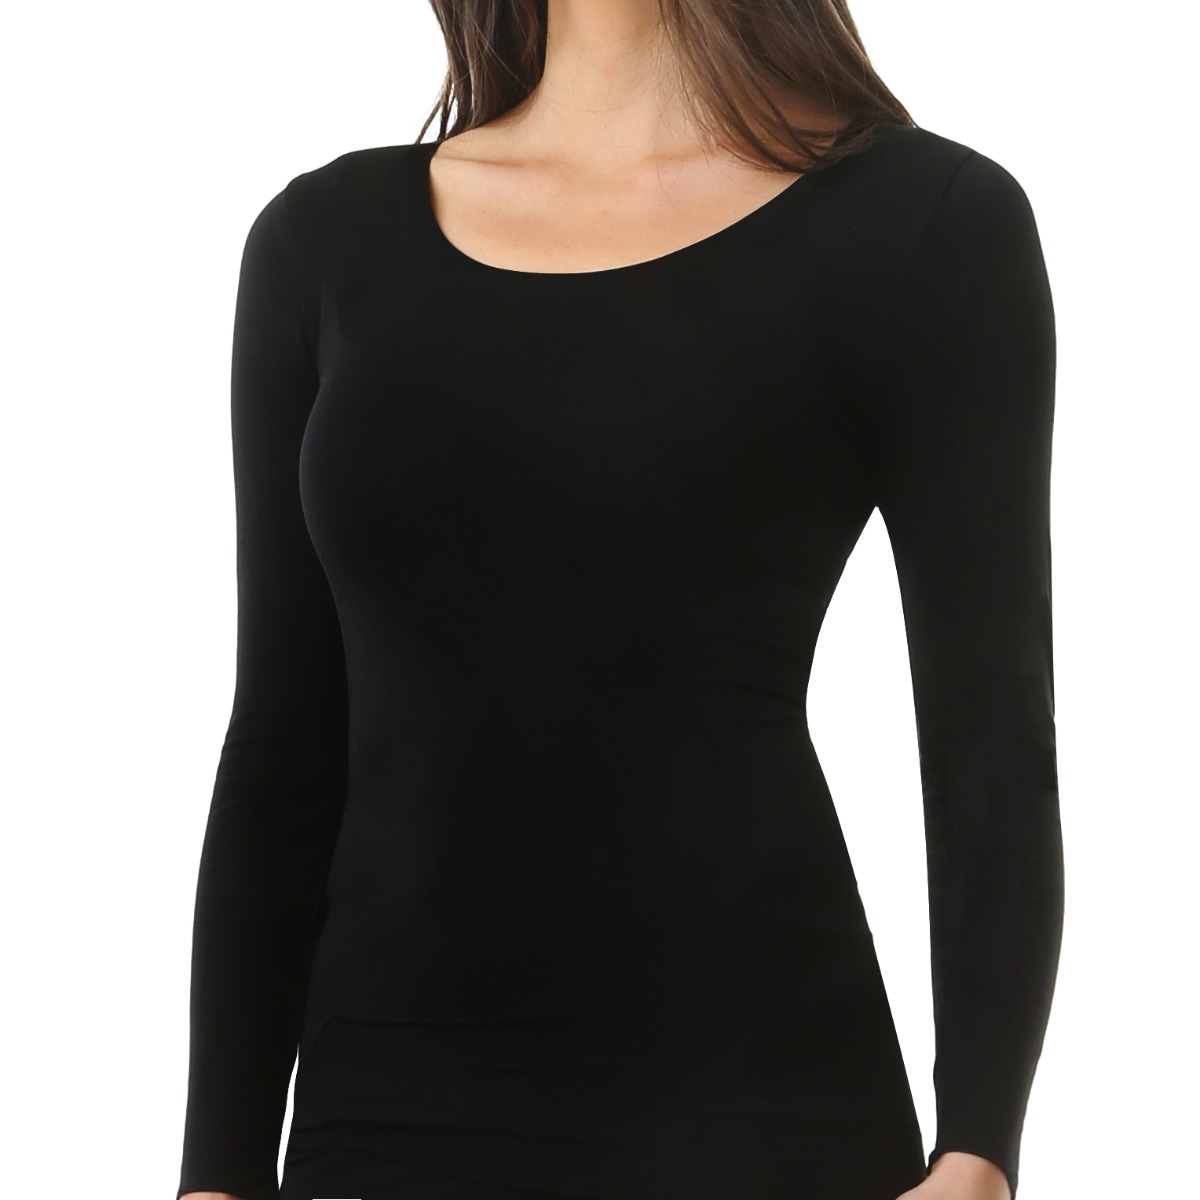 Women's HEAT BODS Invisible Black Thermal Long Sleeve